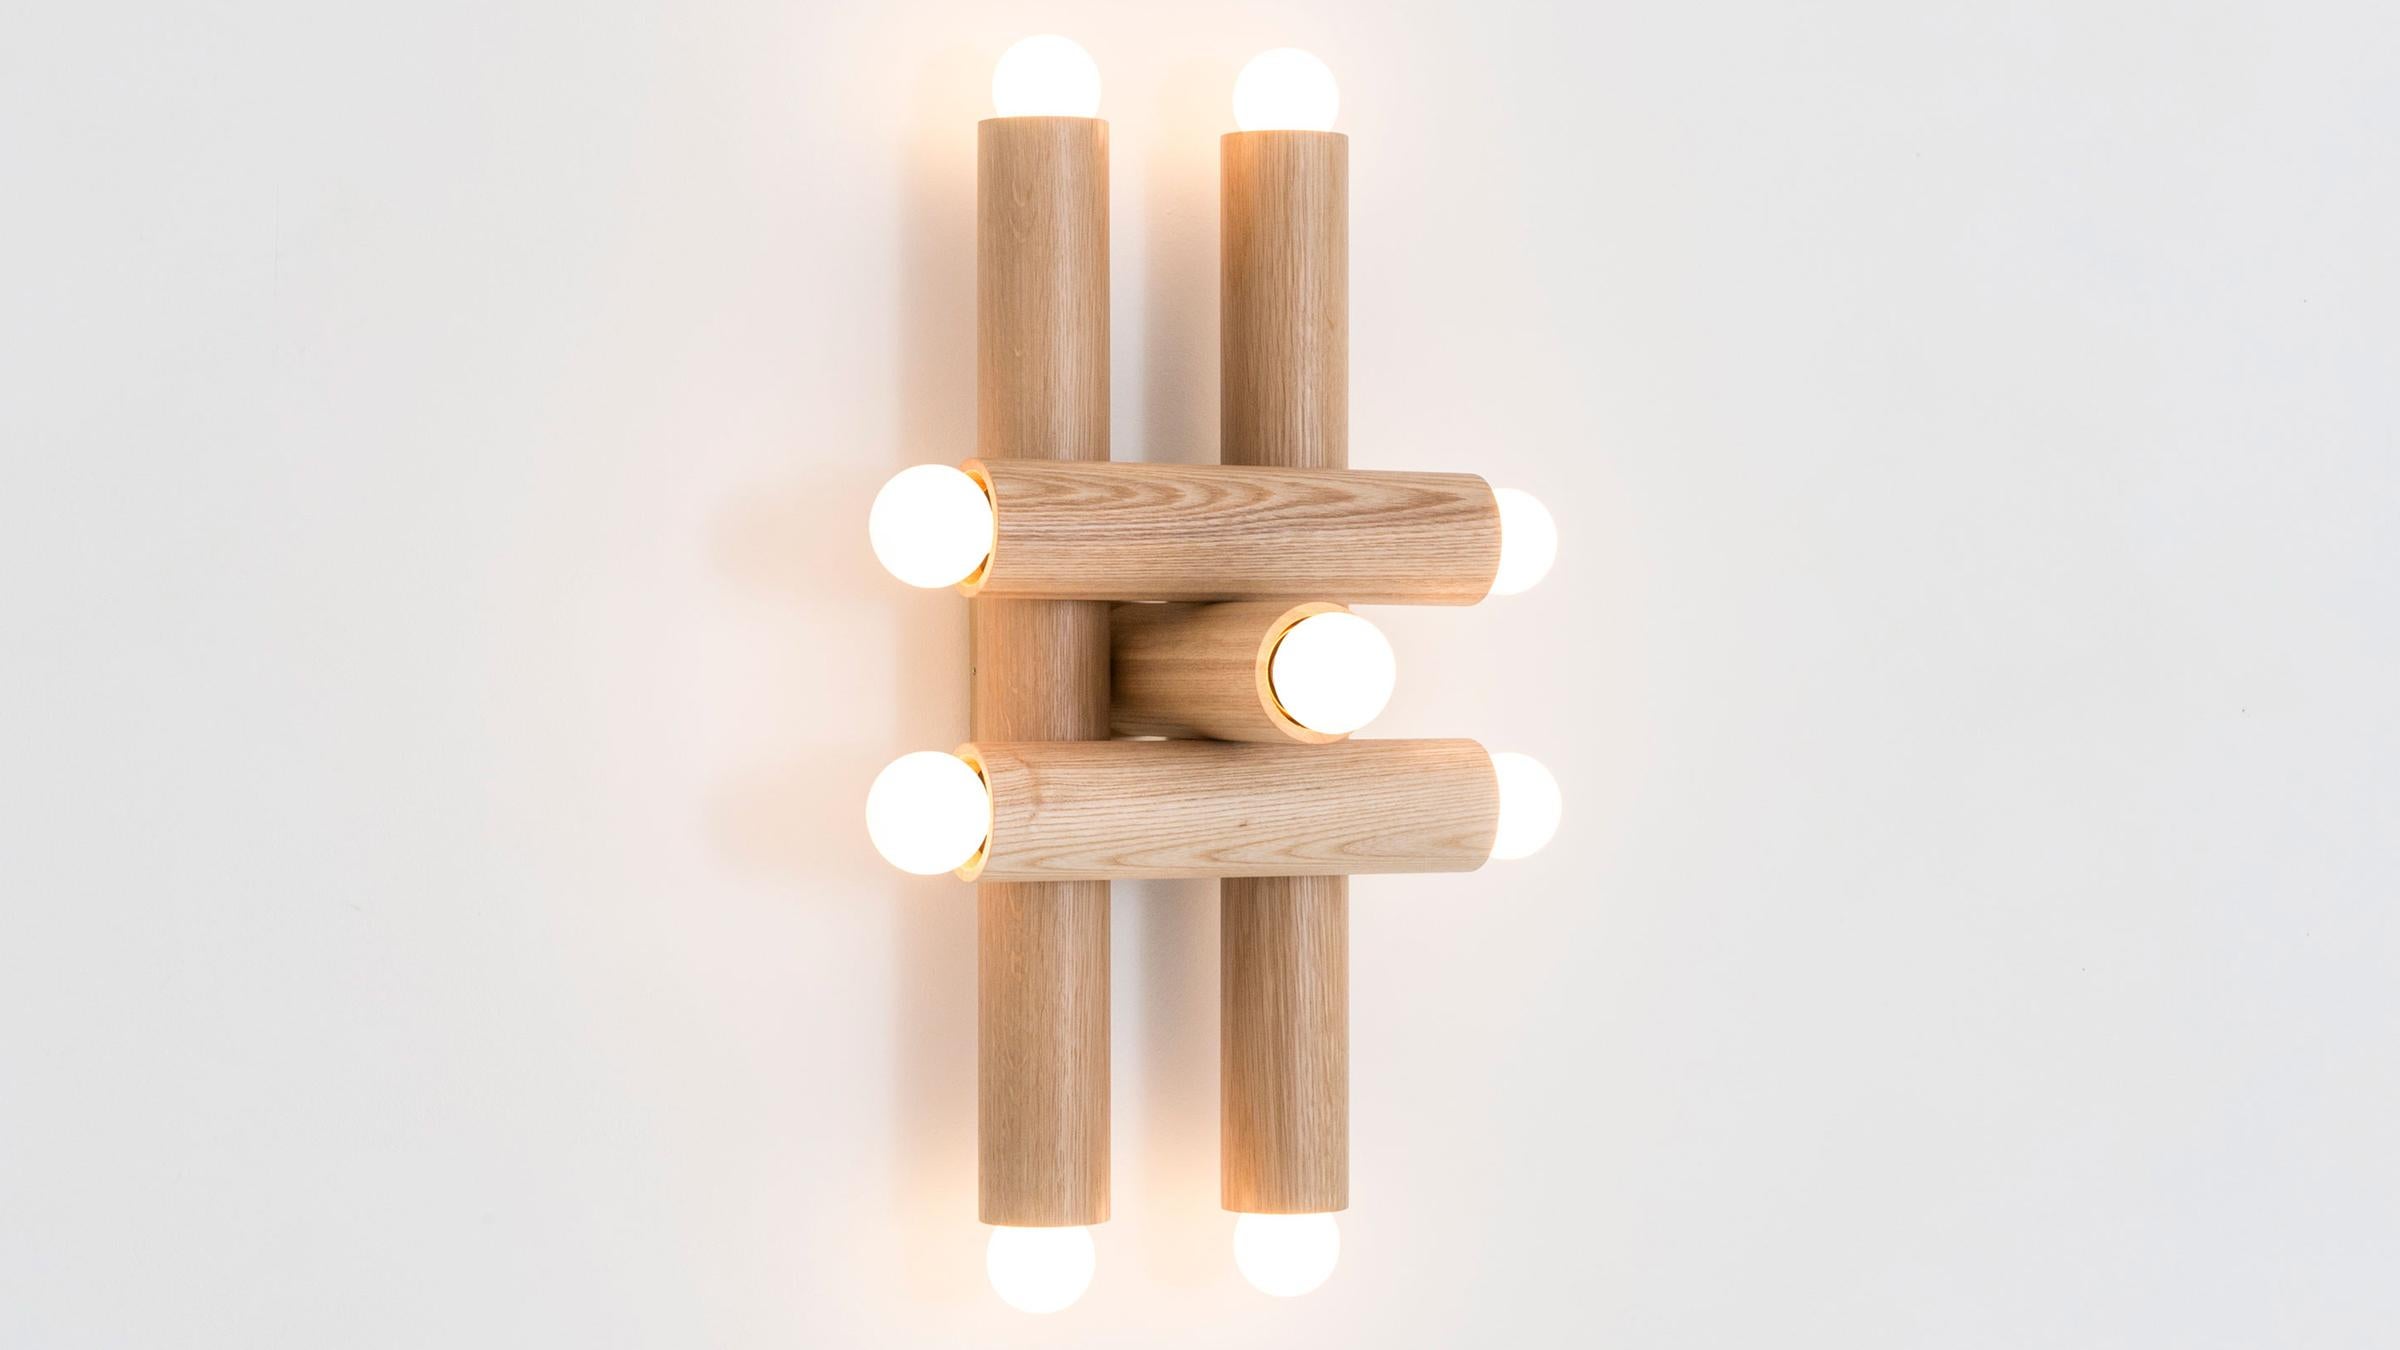 The hieroglyph sconce is composed of nested wood cylinders, the foundational elements of our popular and versatile LODGE collection. The 9-bulb fixture makes a striking luminous statement, referencing essential abstract forms of the De Stijl